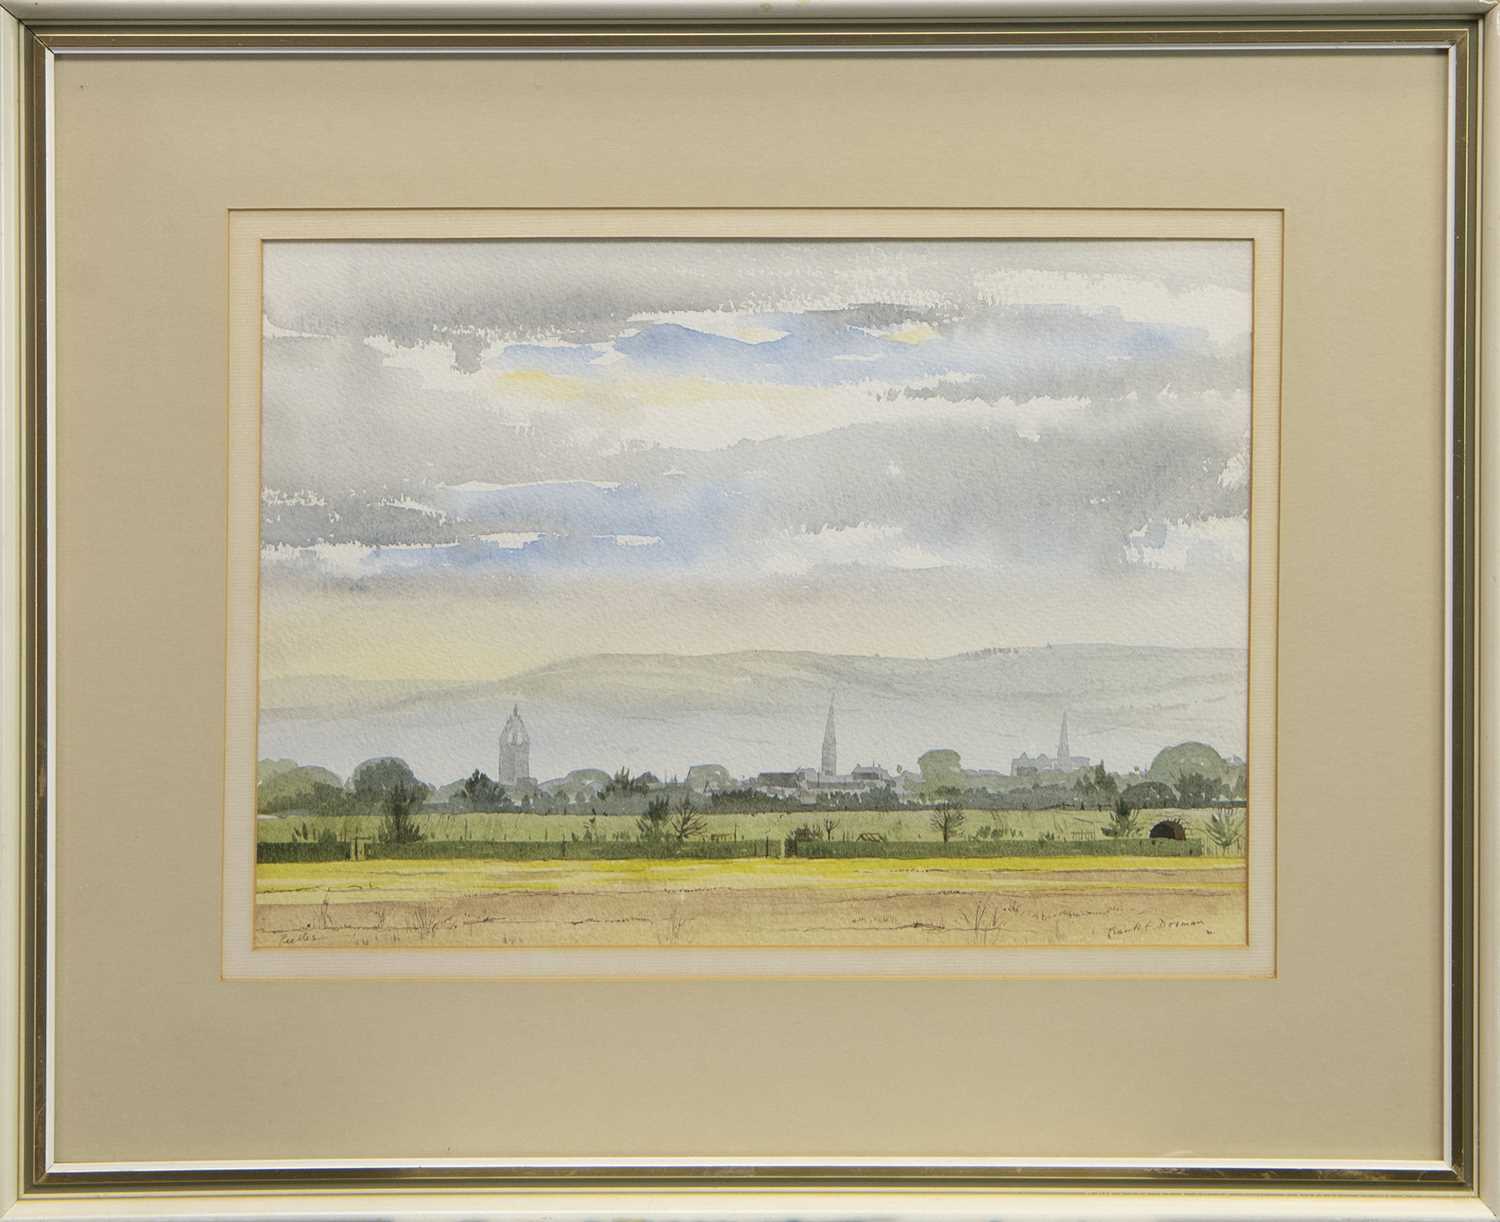 Lot 441 - PEBBLES FROM THE EAST, A WATERCOLOUR BY FRANK DODMAN